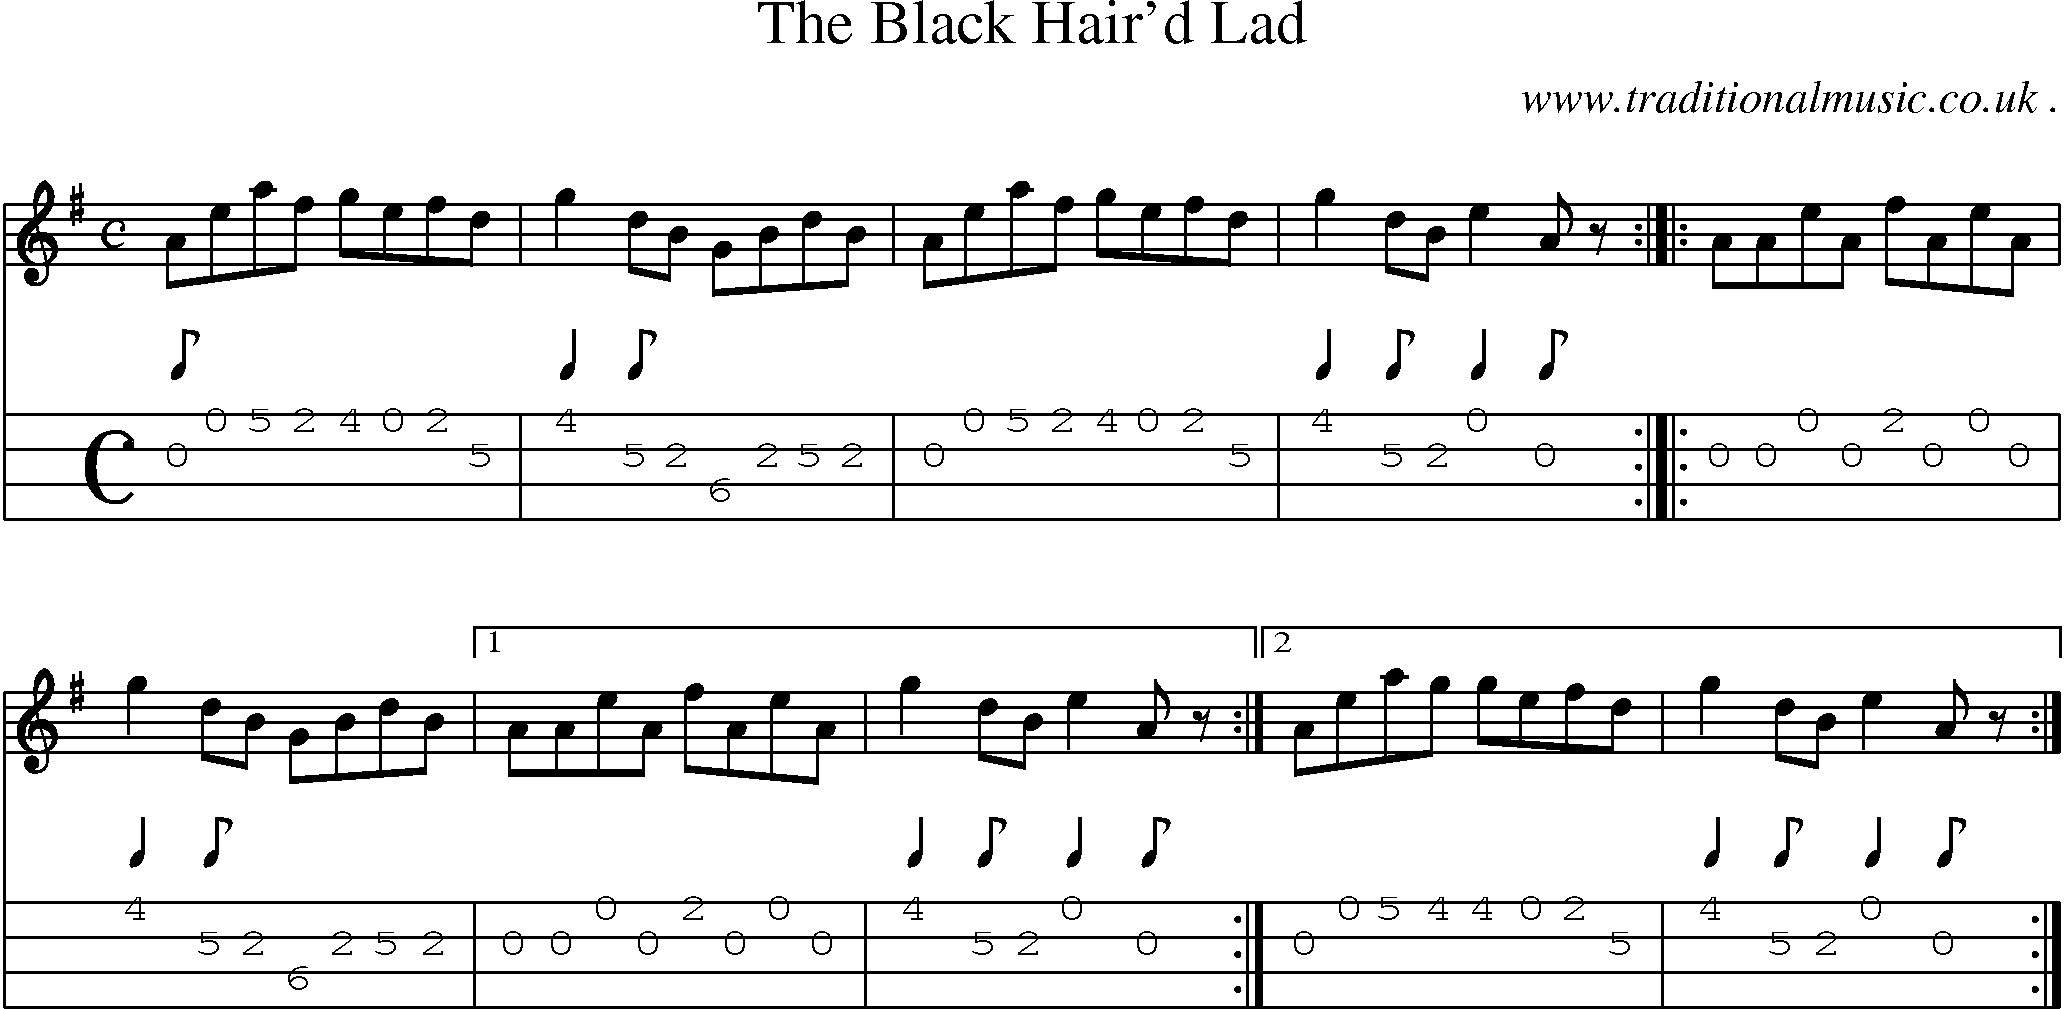 Sheet-music  score, Chords and Mandolin Tabs for The Black Haird Lad